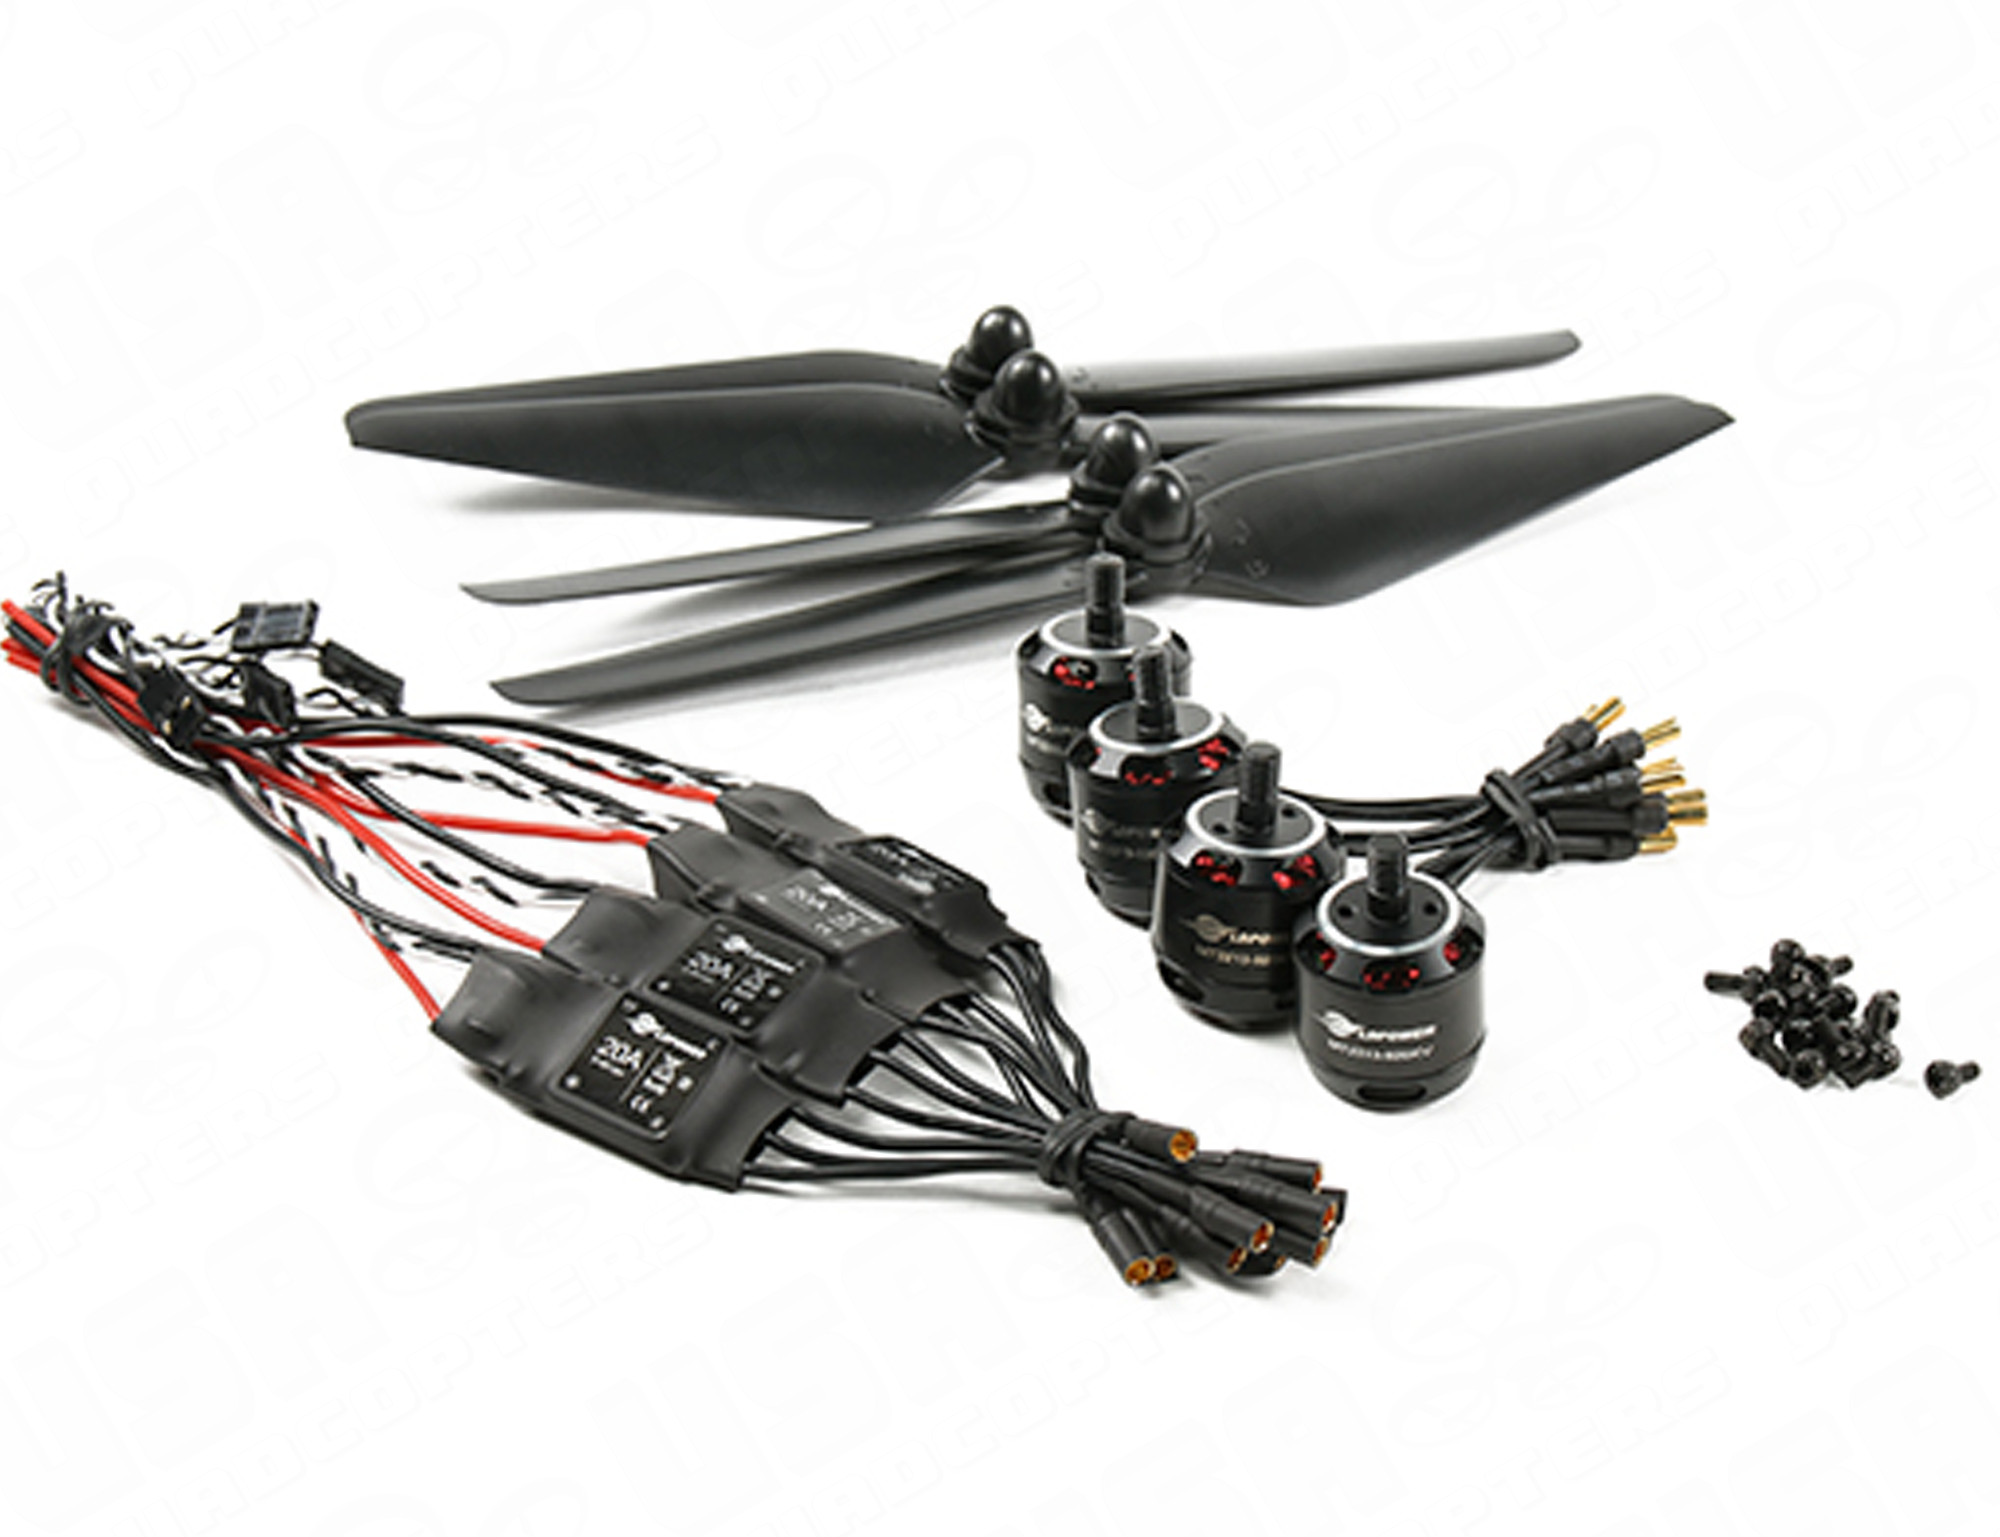 LDPower D300-2 Power System 2213-920kv Motors with 20A ESCs and 9.5x4.5 Propellers